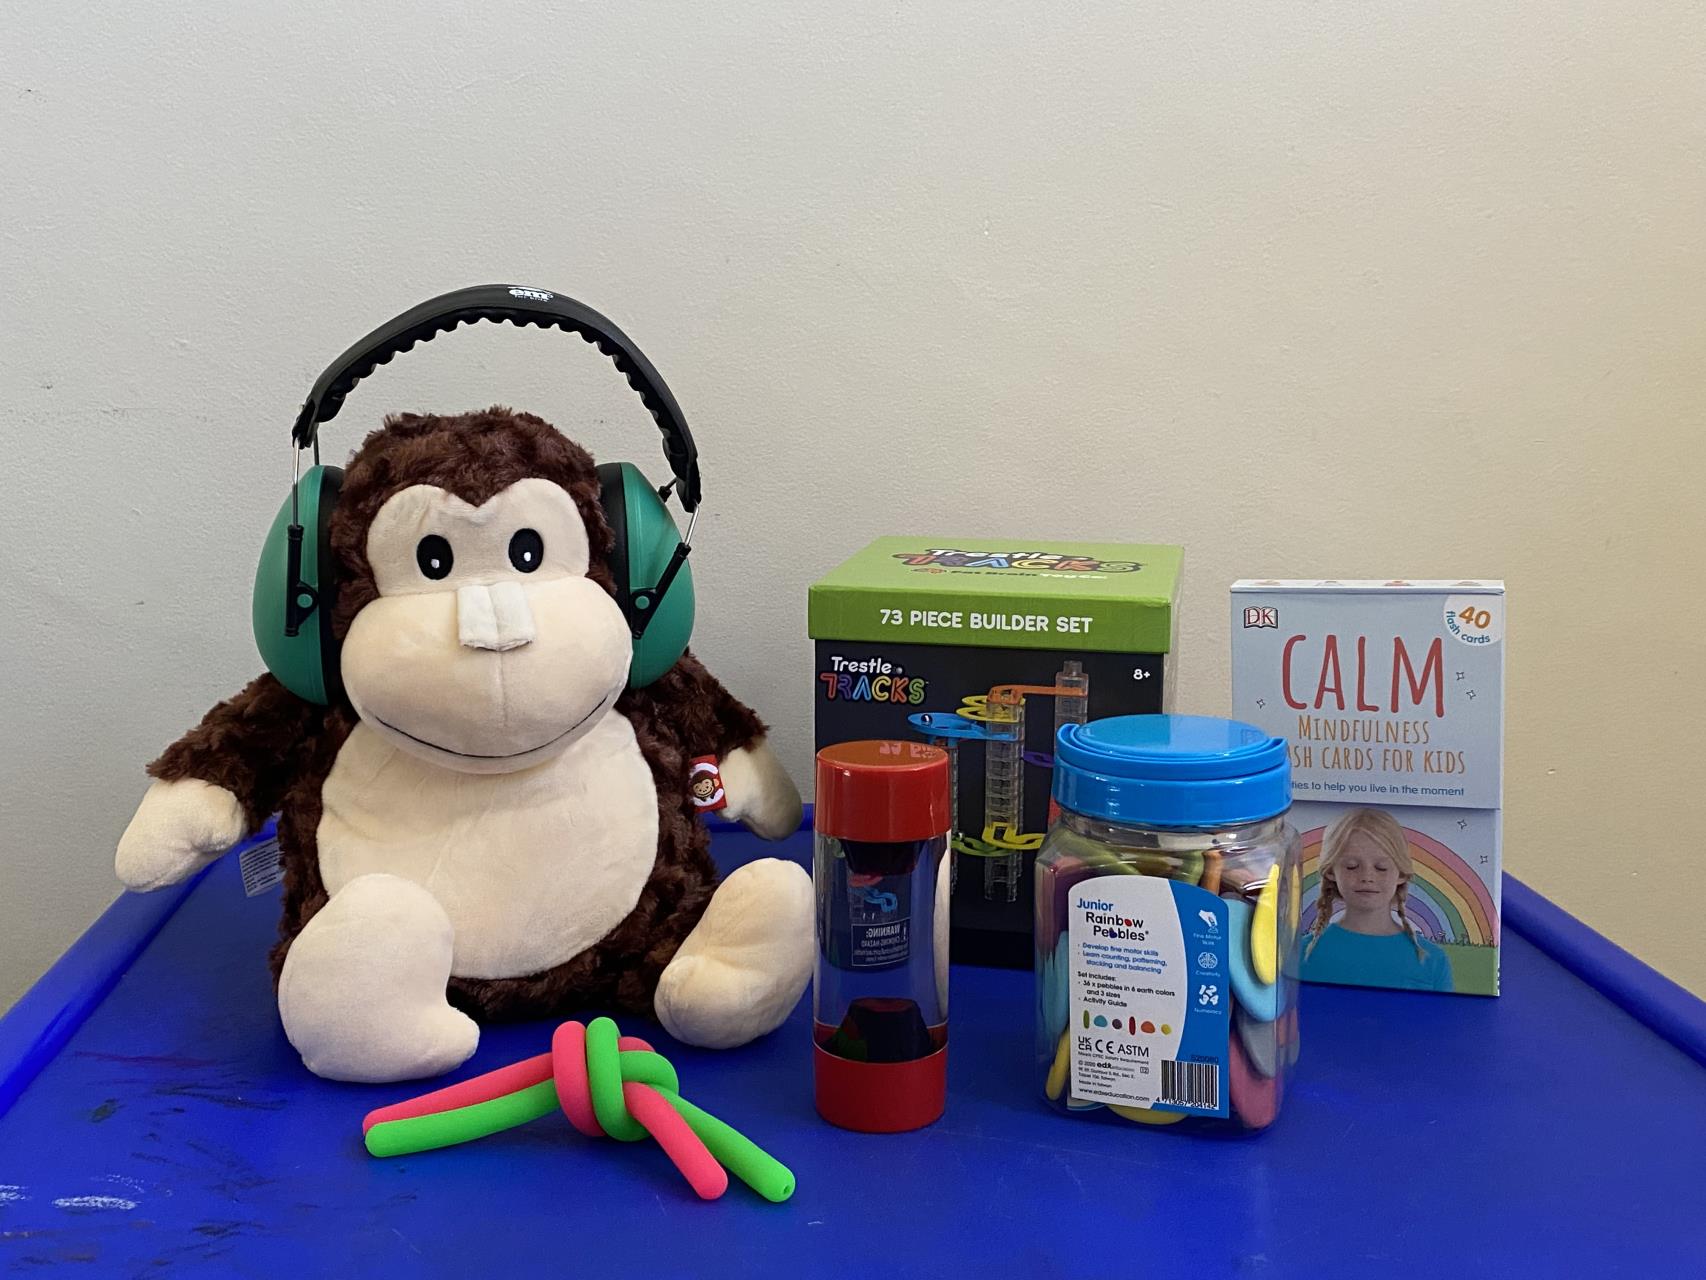 Kids Sensory Kits Join the Collection at Denmark's Library